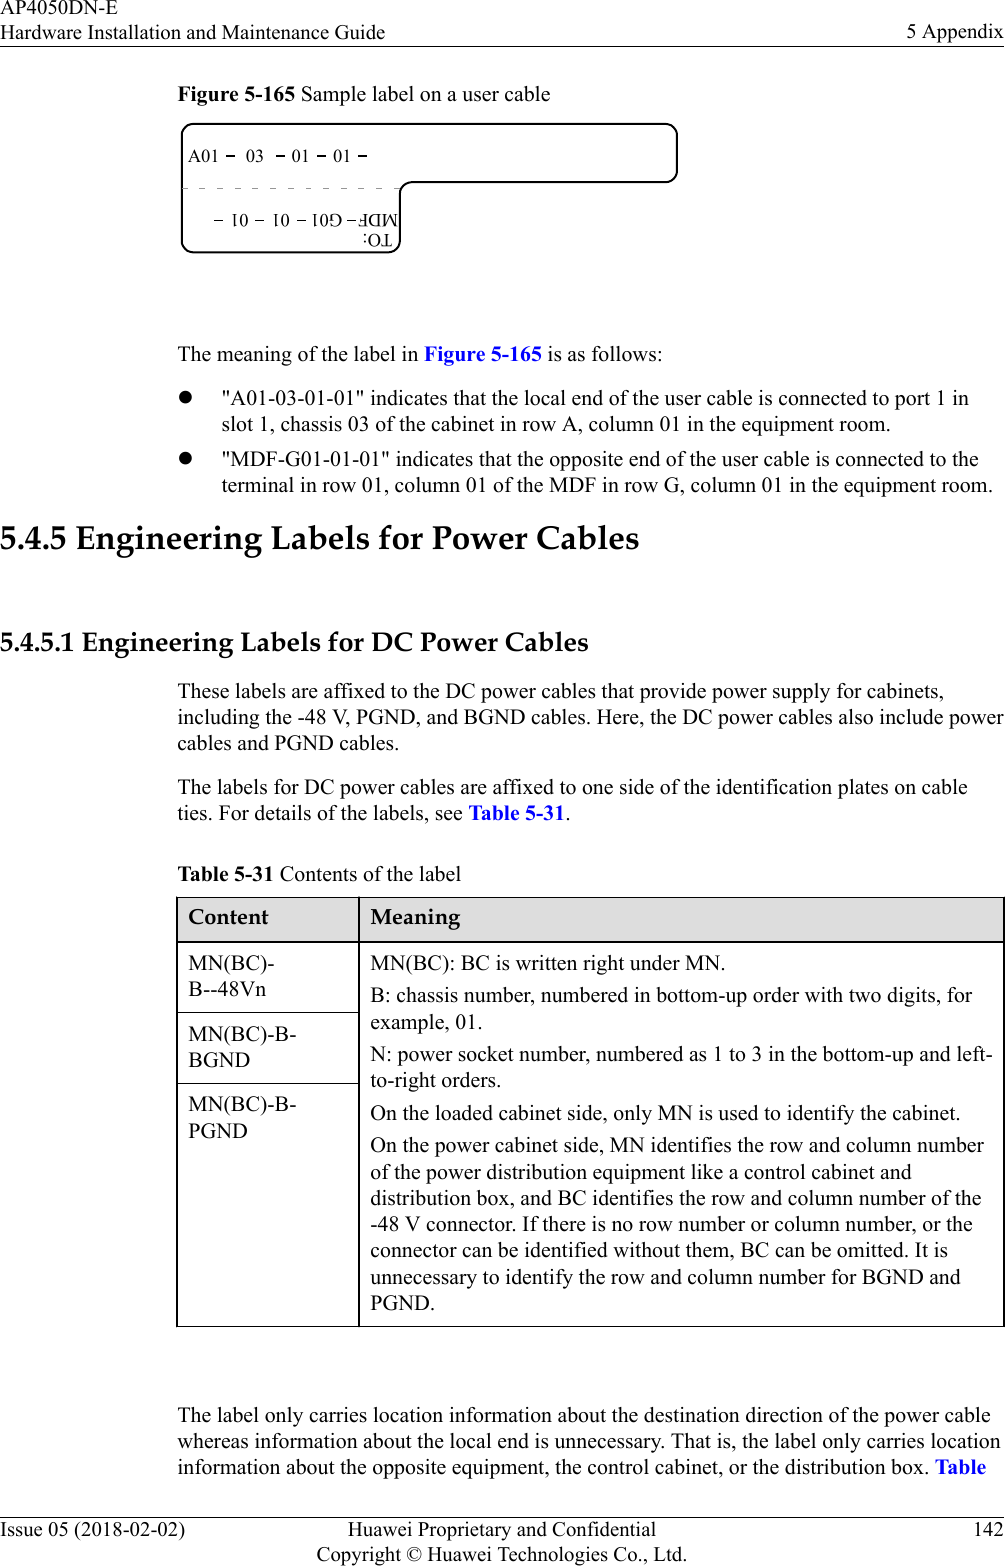 Figure 5-165 Sample label on a user cableA01TO:03 01 01MDF G01 01 01 The meaning of the label in Figure 5-165 is as follows:l&quot;A01-03-01-01&quot; indicates that the local end of the user cable is connected to port 1 inslot 1, chassis 03 of the cabinet in row A, column 01 in the equipment room.l&quot;MDF-G01-01-01&quot; indicates that the opposite end of the user cable is connected to theterminal in row 01, column 01 of the MDF in row G, column 01 in the equipment room.5.4.5 Engineering Labels for Power Cables5.4.5.1 Engineering Labels for DC Power CablesThese labels are affixed to the DC power cables that provide power supply for cabinets,including the -48 V, PGND, and BGND cables. Here, the DC power cables also include powercables and PGND cables.The labels for DC power cables are affixed to one side of the identification plates on cableties. For details of the labels, see Table 5-31.Table 5-31 Contents of the labelContent MeaningMN(BC)-B--48VnMN(BC): BC is written right under MN.B: chassis number, numbered in bottom-up order with two digits, forexample, 01.N: power socket number, numbered as 1 to 3 in the bottom-up and left-to-right orders.On the loaded cabinet side, only MN is used to identify the cabinet.On the power cabinet side, MN identifies the row and column numberof the power distribution equipment like a control cabinet anddistribution box, and BC identifies the row and column number of the-48 V connector. If there is no row number or column number, or theconnector can be identified without them, BC can be omitted. It isunnecessary to identify the row and column number for BGND andPGND.MN(BC)-B-BGNDMN(BC)-B-PGND The label only carries location information about the destination direction of the power cablewhereas information about the local end is unnecessary. That is, the label only carries locationinformation about the opposite equipment, the control cabinet, or the distribution box. TableAP4050DN-EHardware Installation and Maintenance Guide 5 AppendixIssue 05 (2018-02-02) Huawei Proprietary and ConfidentialCopyright © Huawei Technologies Co., Ltd.142